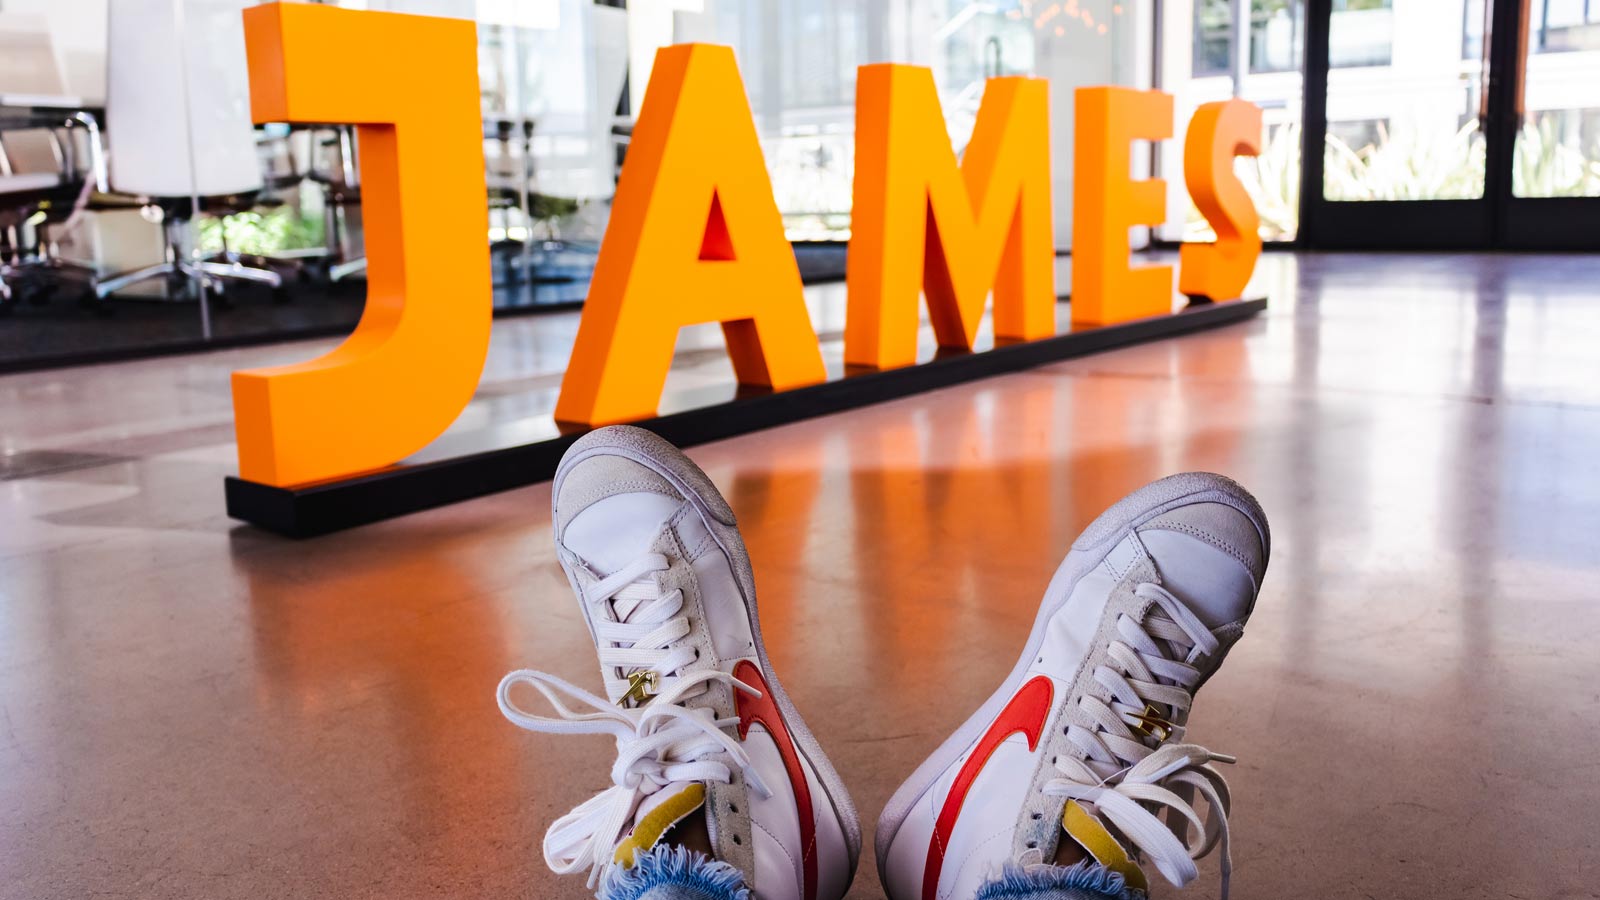 Promotional photo from The James Agency showing a person's sneaker-clad feet kicked up in the lobby...